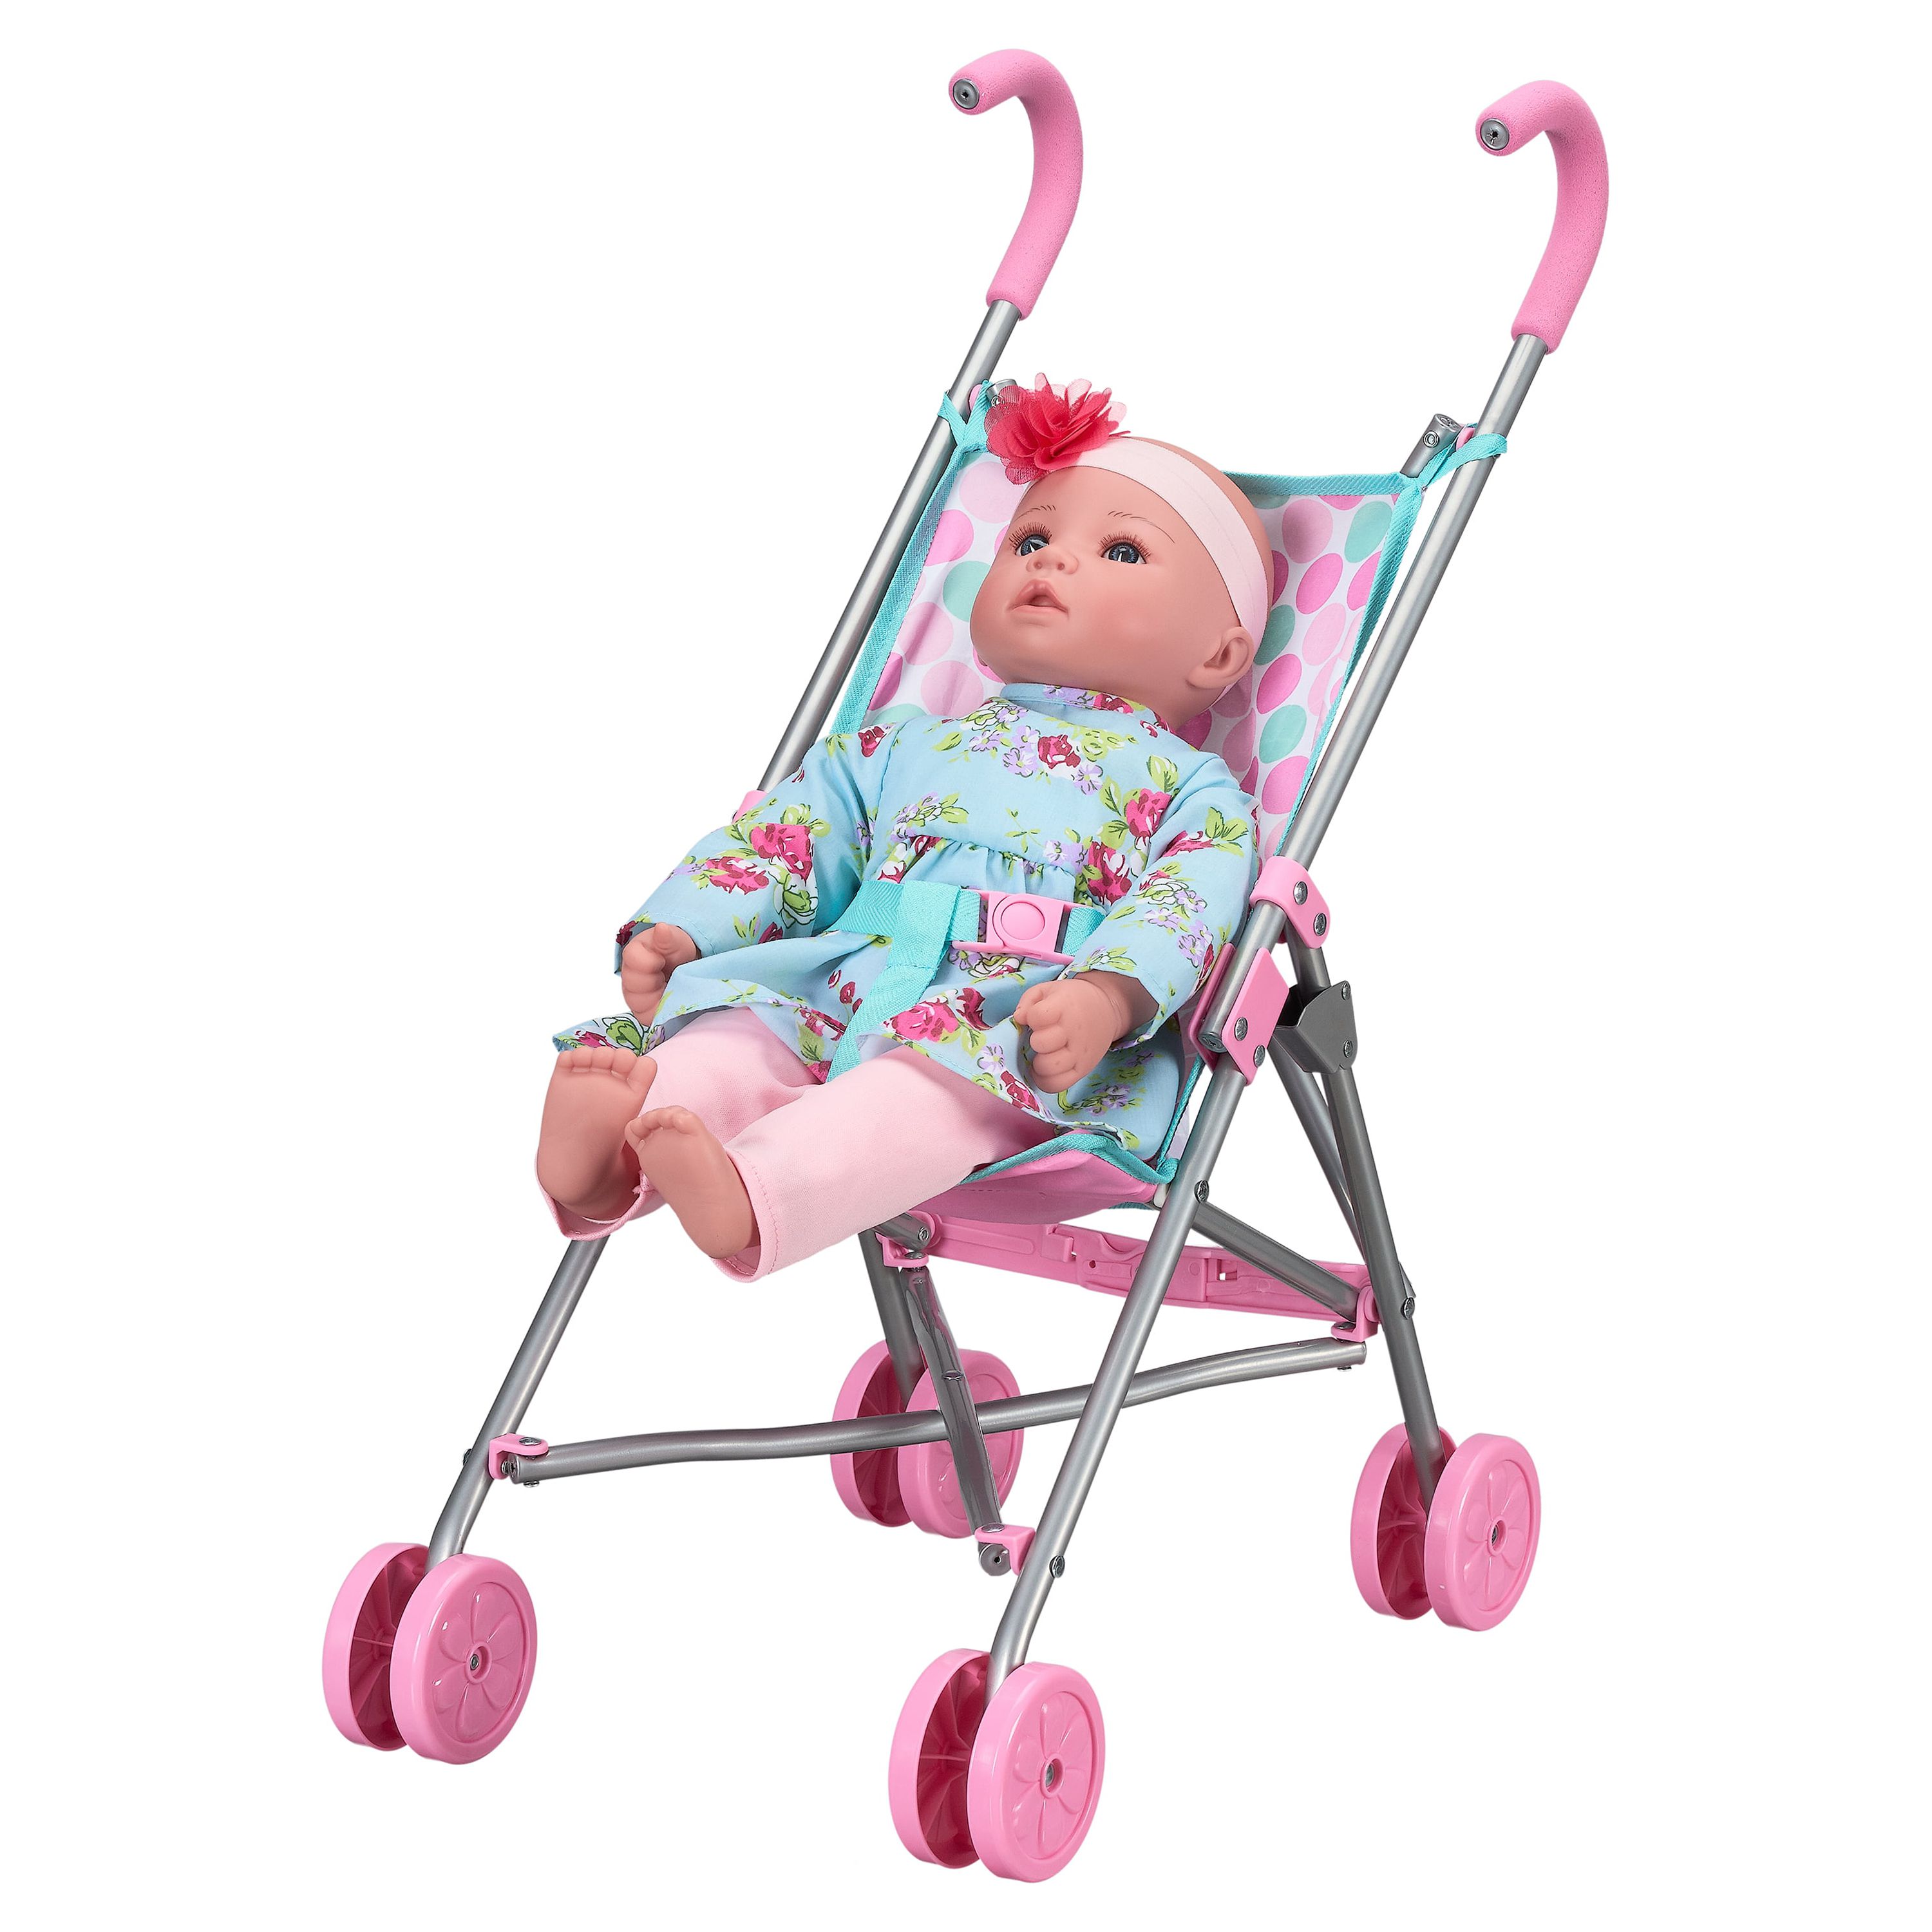 My Sweet Love Umbrella Stroller for Dolls, Multicolor - image 4 of 5